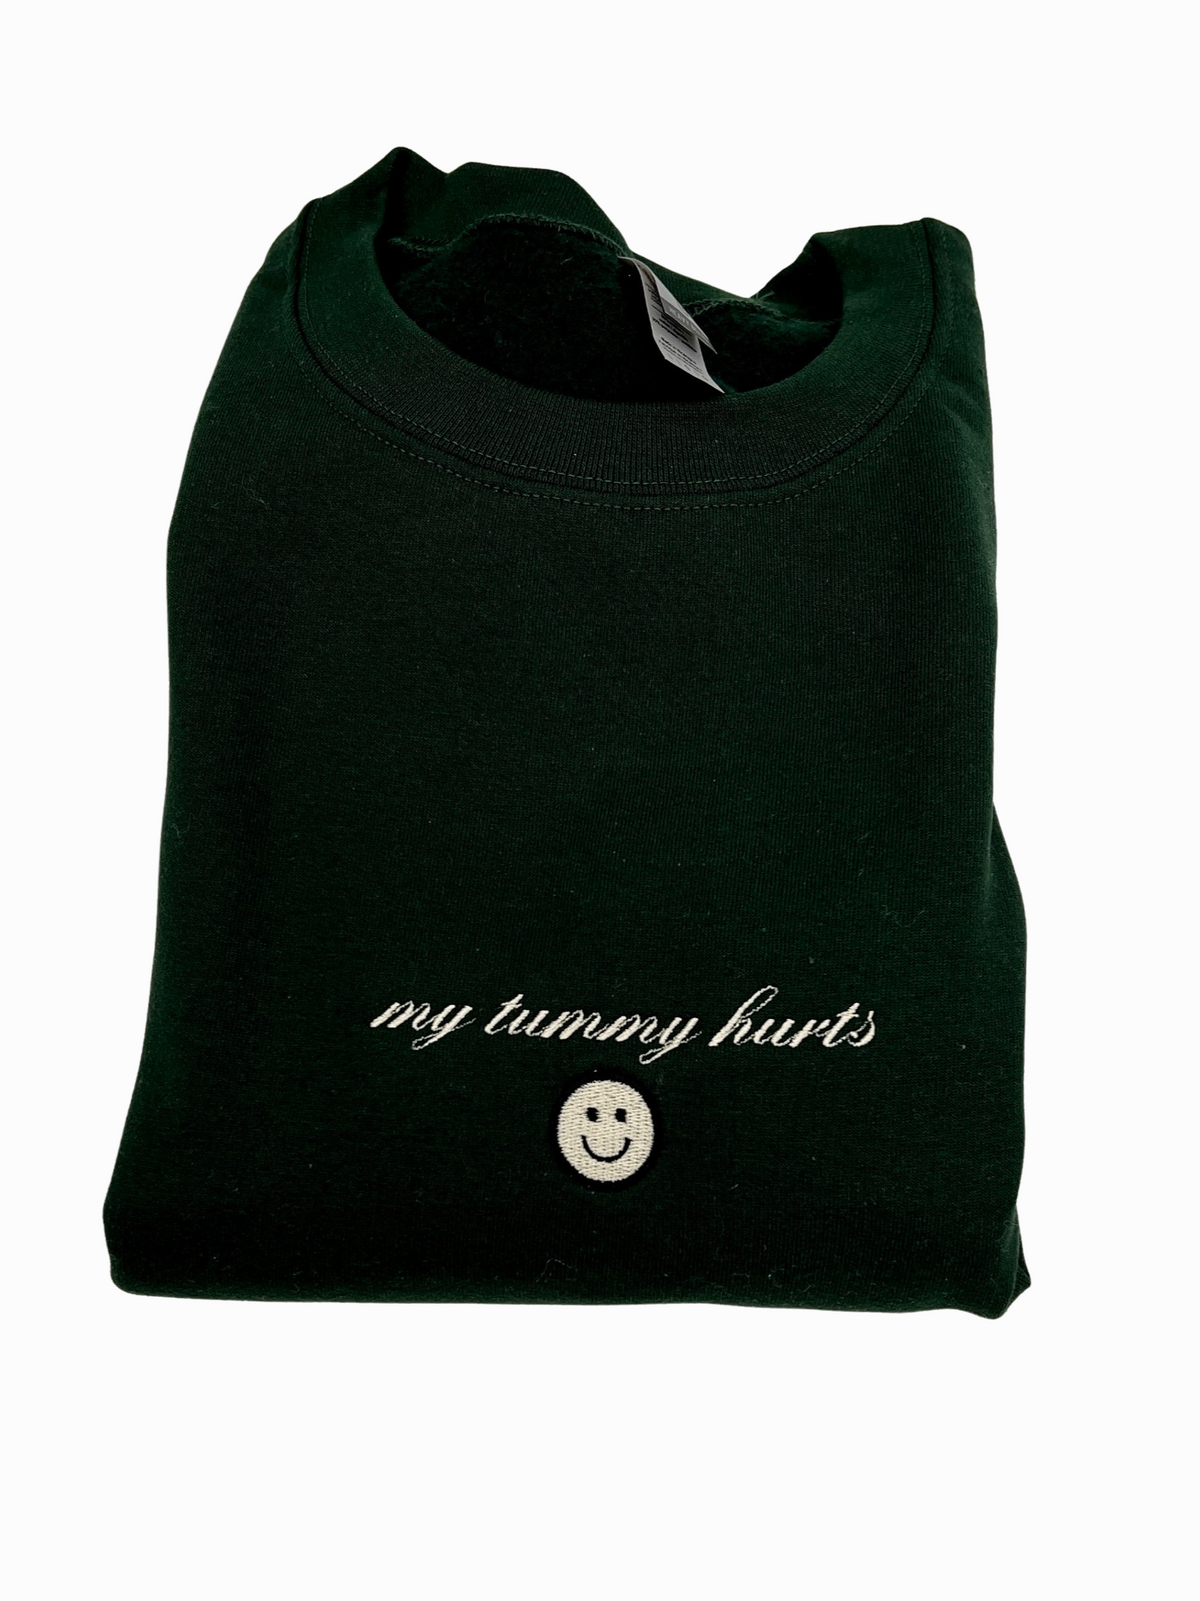 My Tummy Hurts Embroidered Unisex T-Shirt or Crewneck